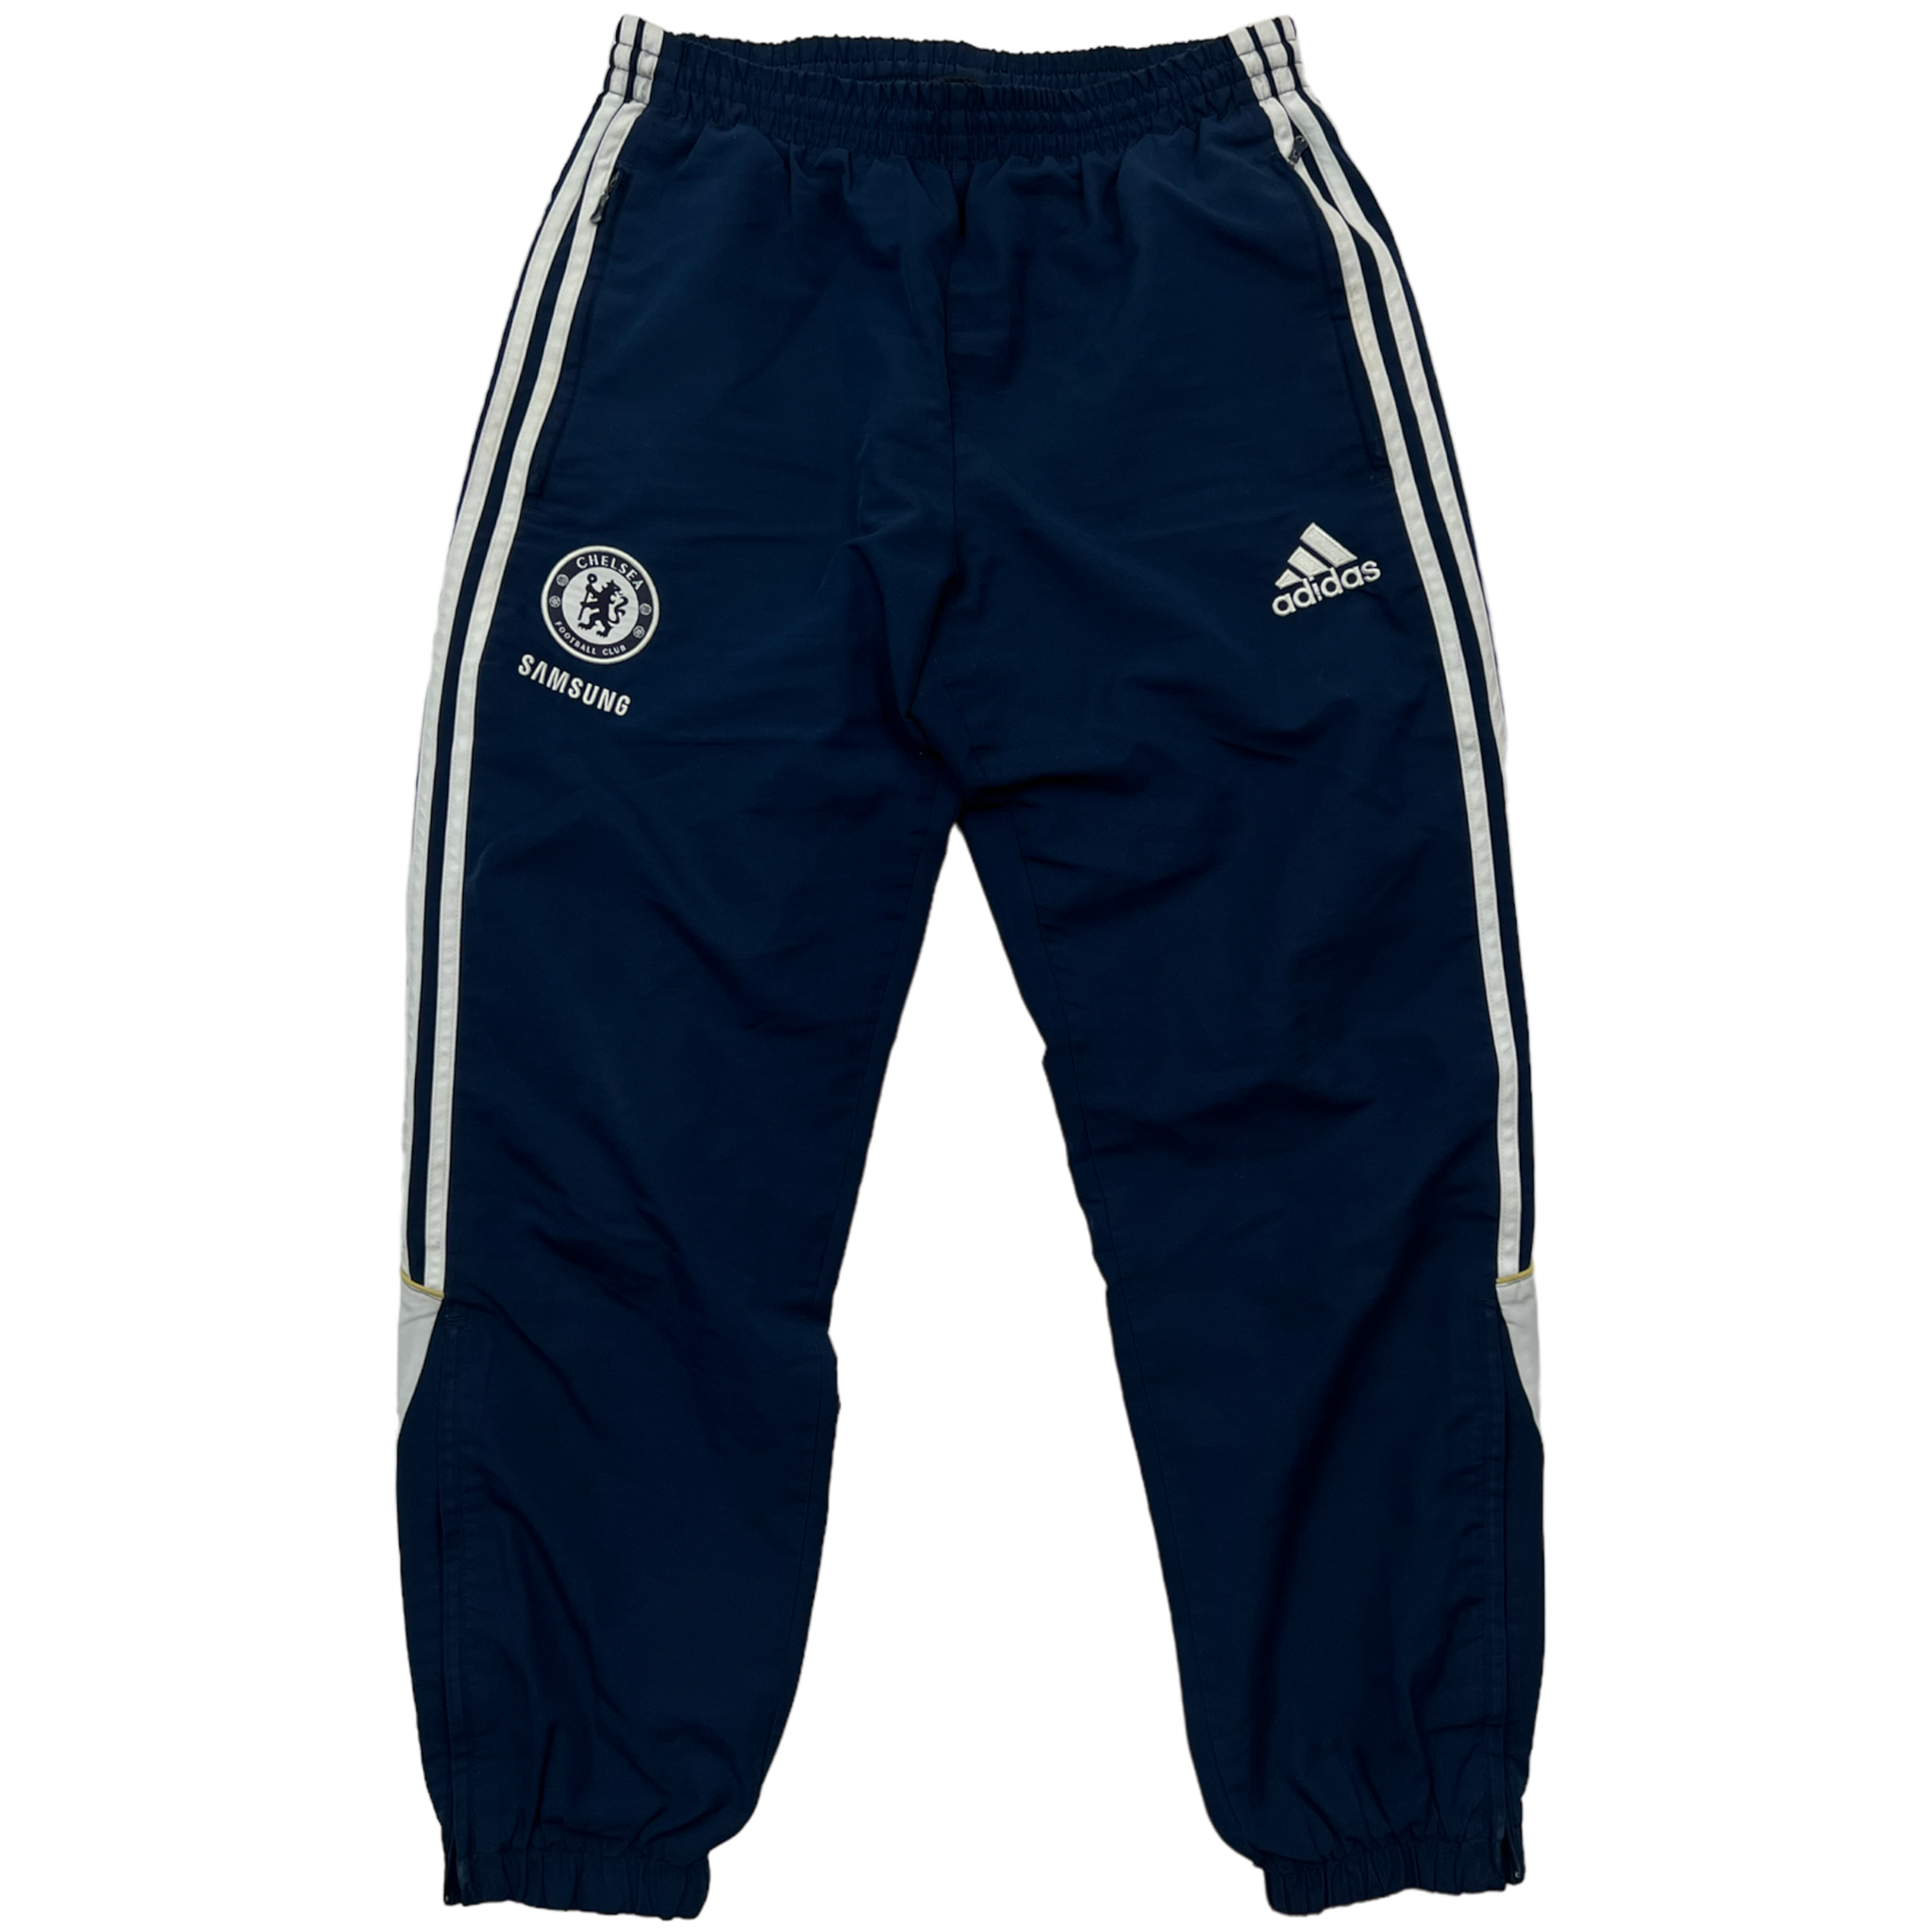 adidas Cardiff City FC Training Track Pants  Navy  Mens  Compare  Union  Square Aberdeen Shopping Centre